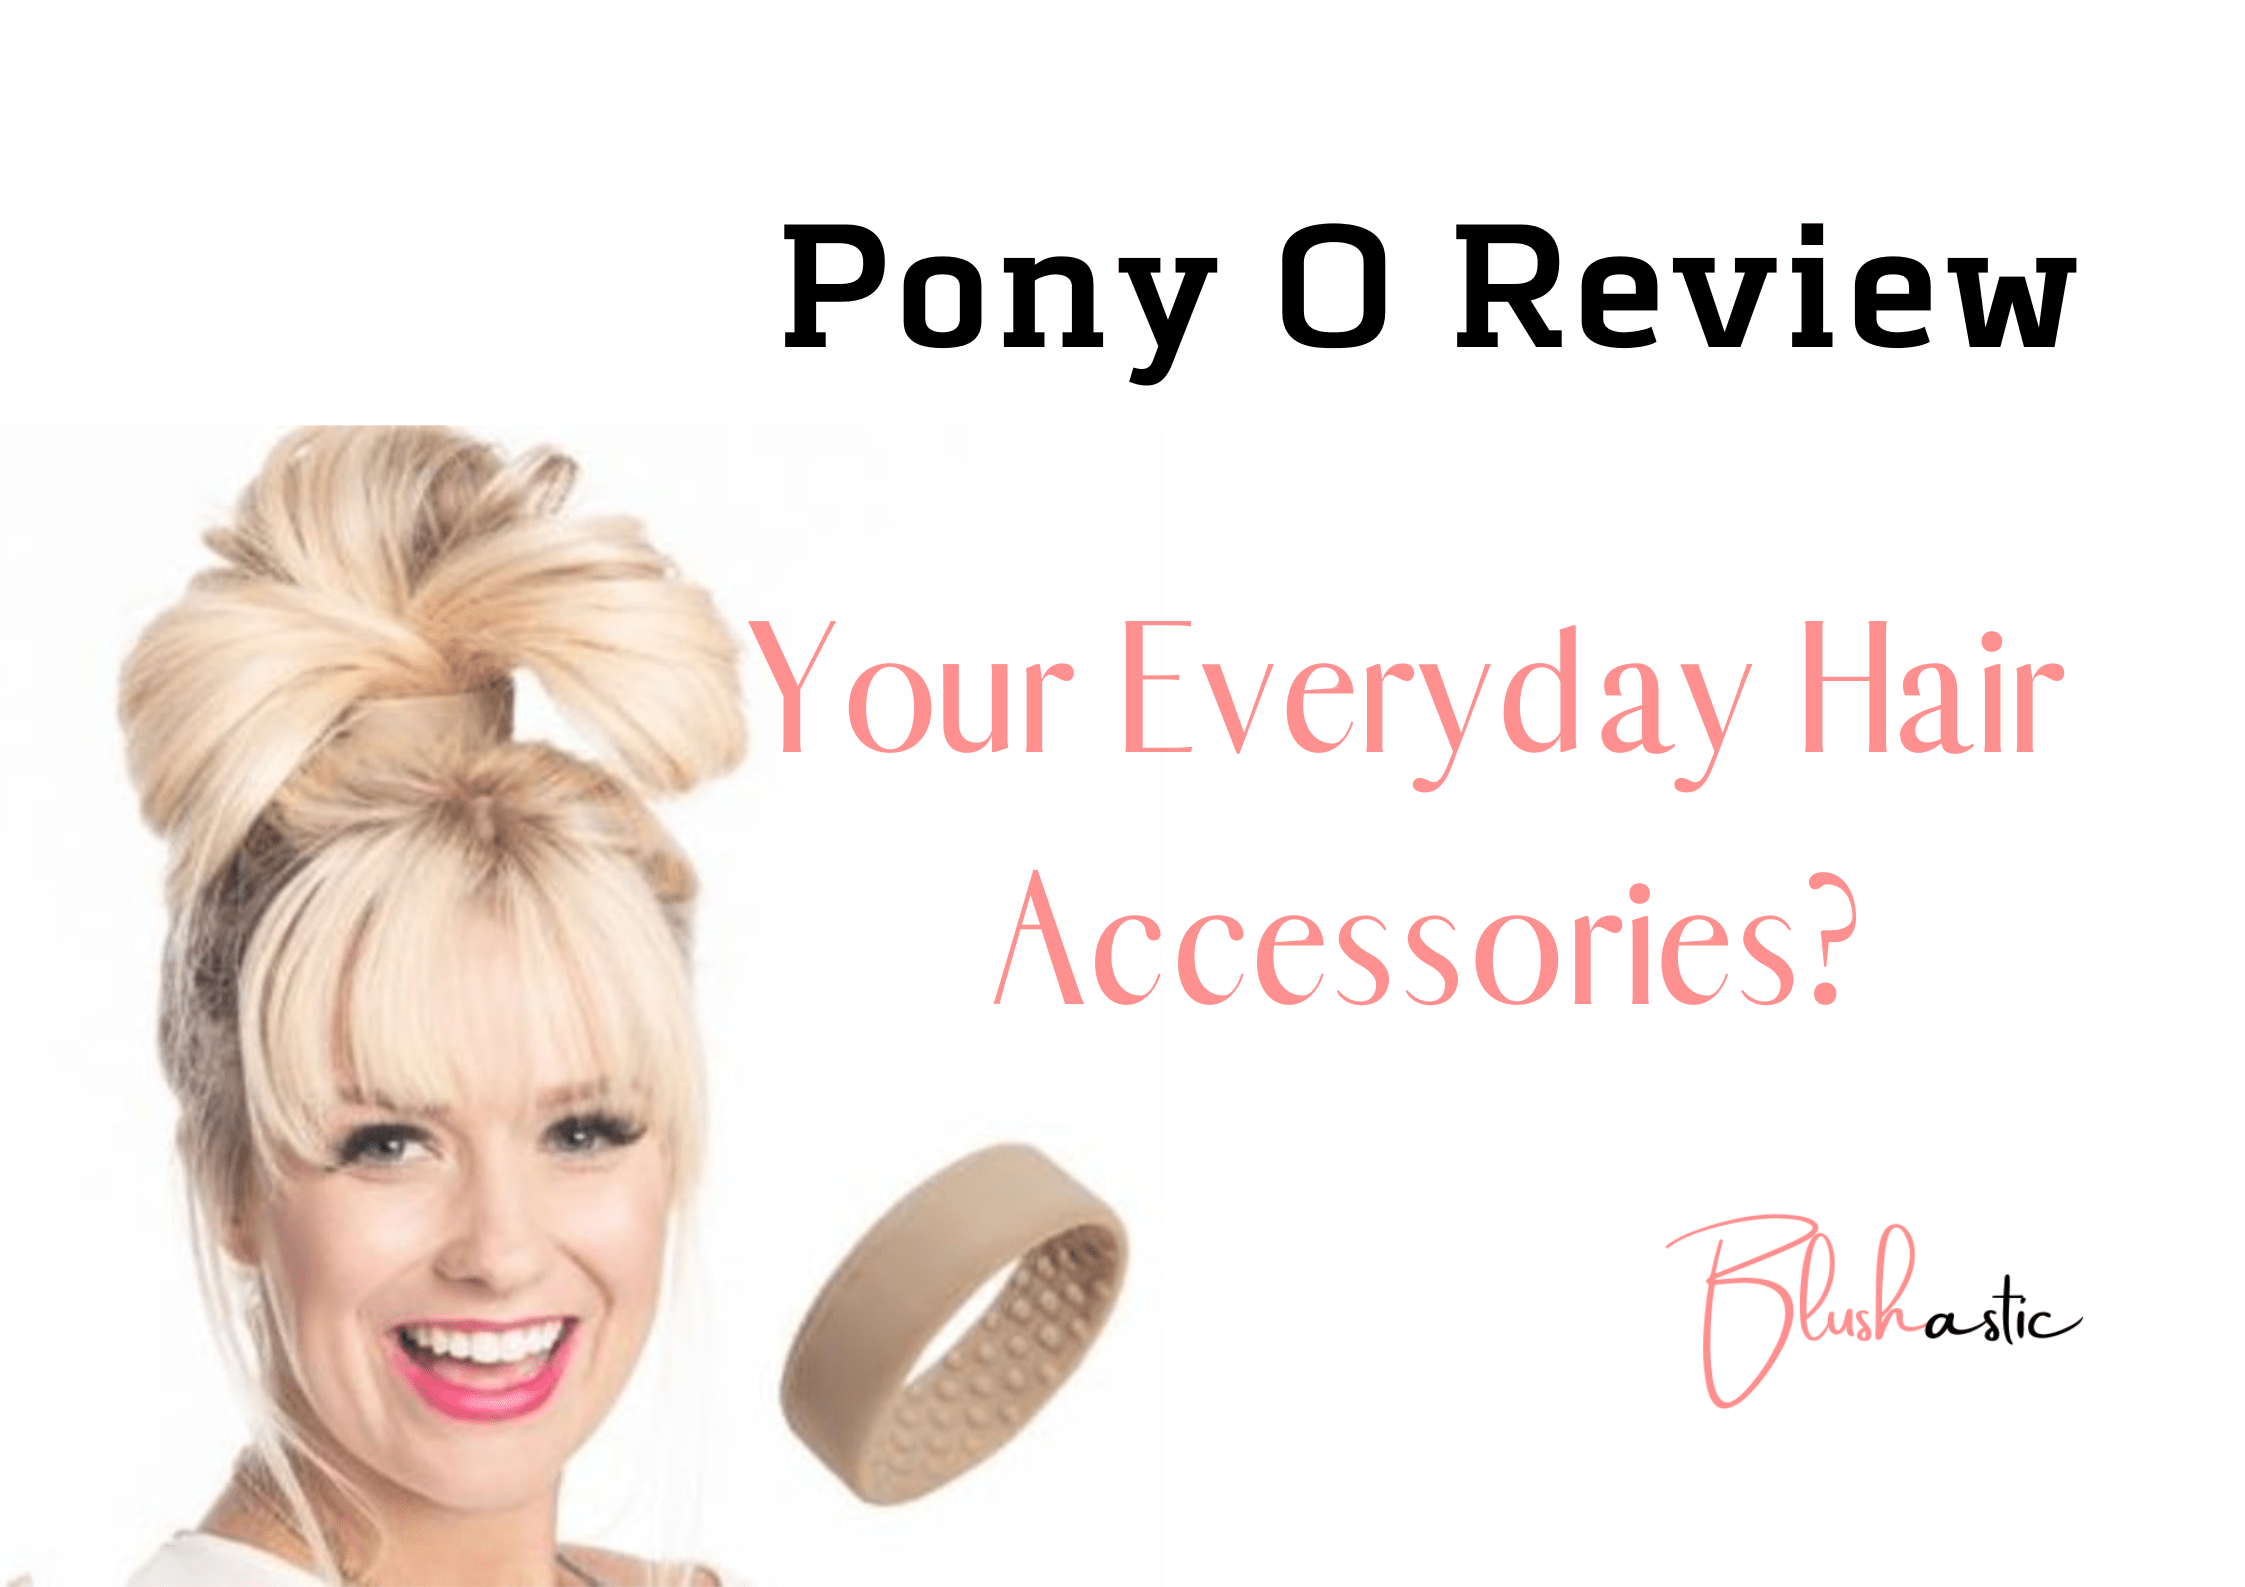 PONY-O 4 Pack Original Hair Tie Alternative - Revolutionary Ponytail Holder  Hair Accessories for Women - Medium Size PONY-O for Normal Hair - Brown